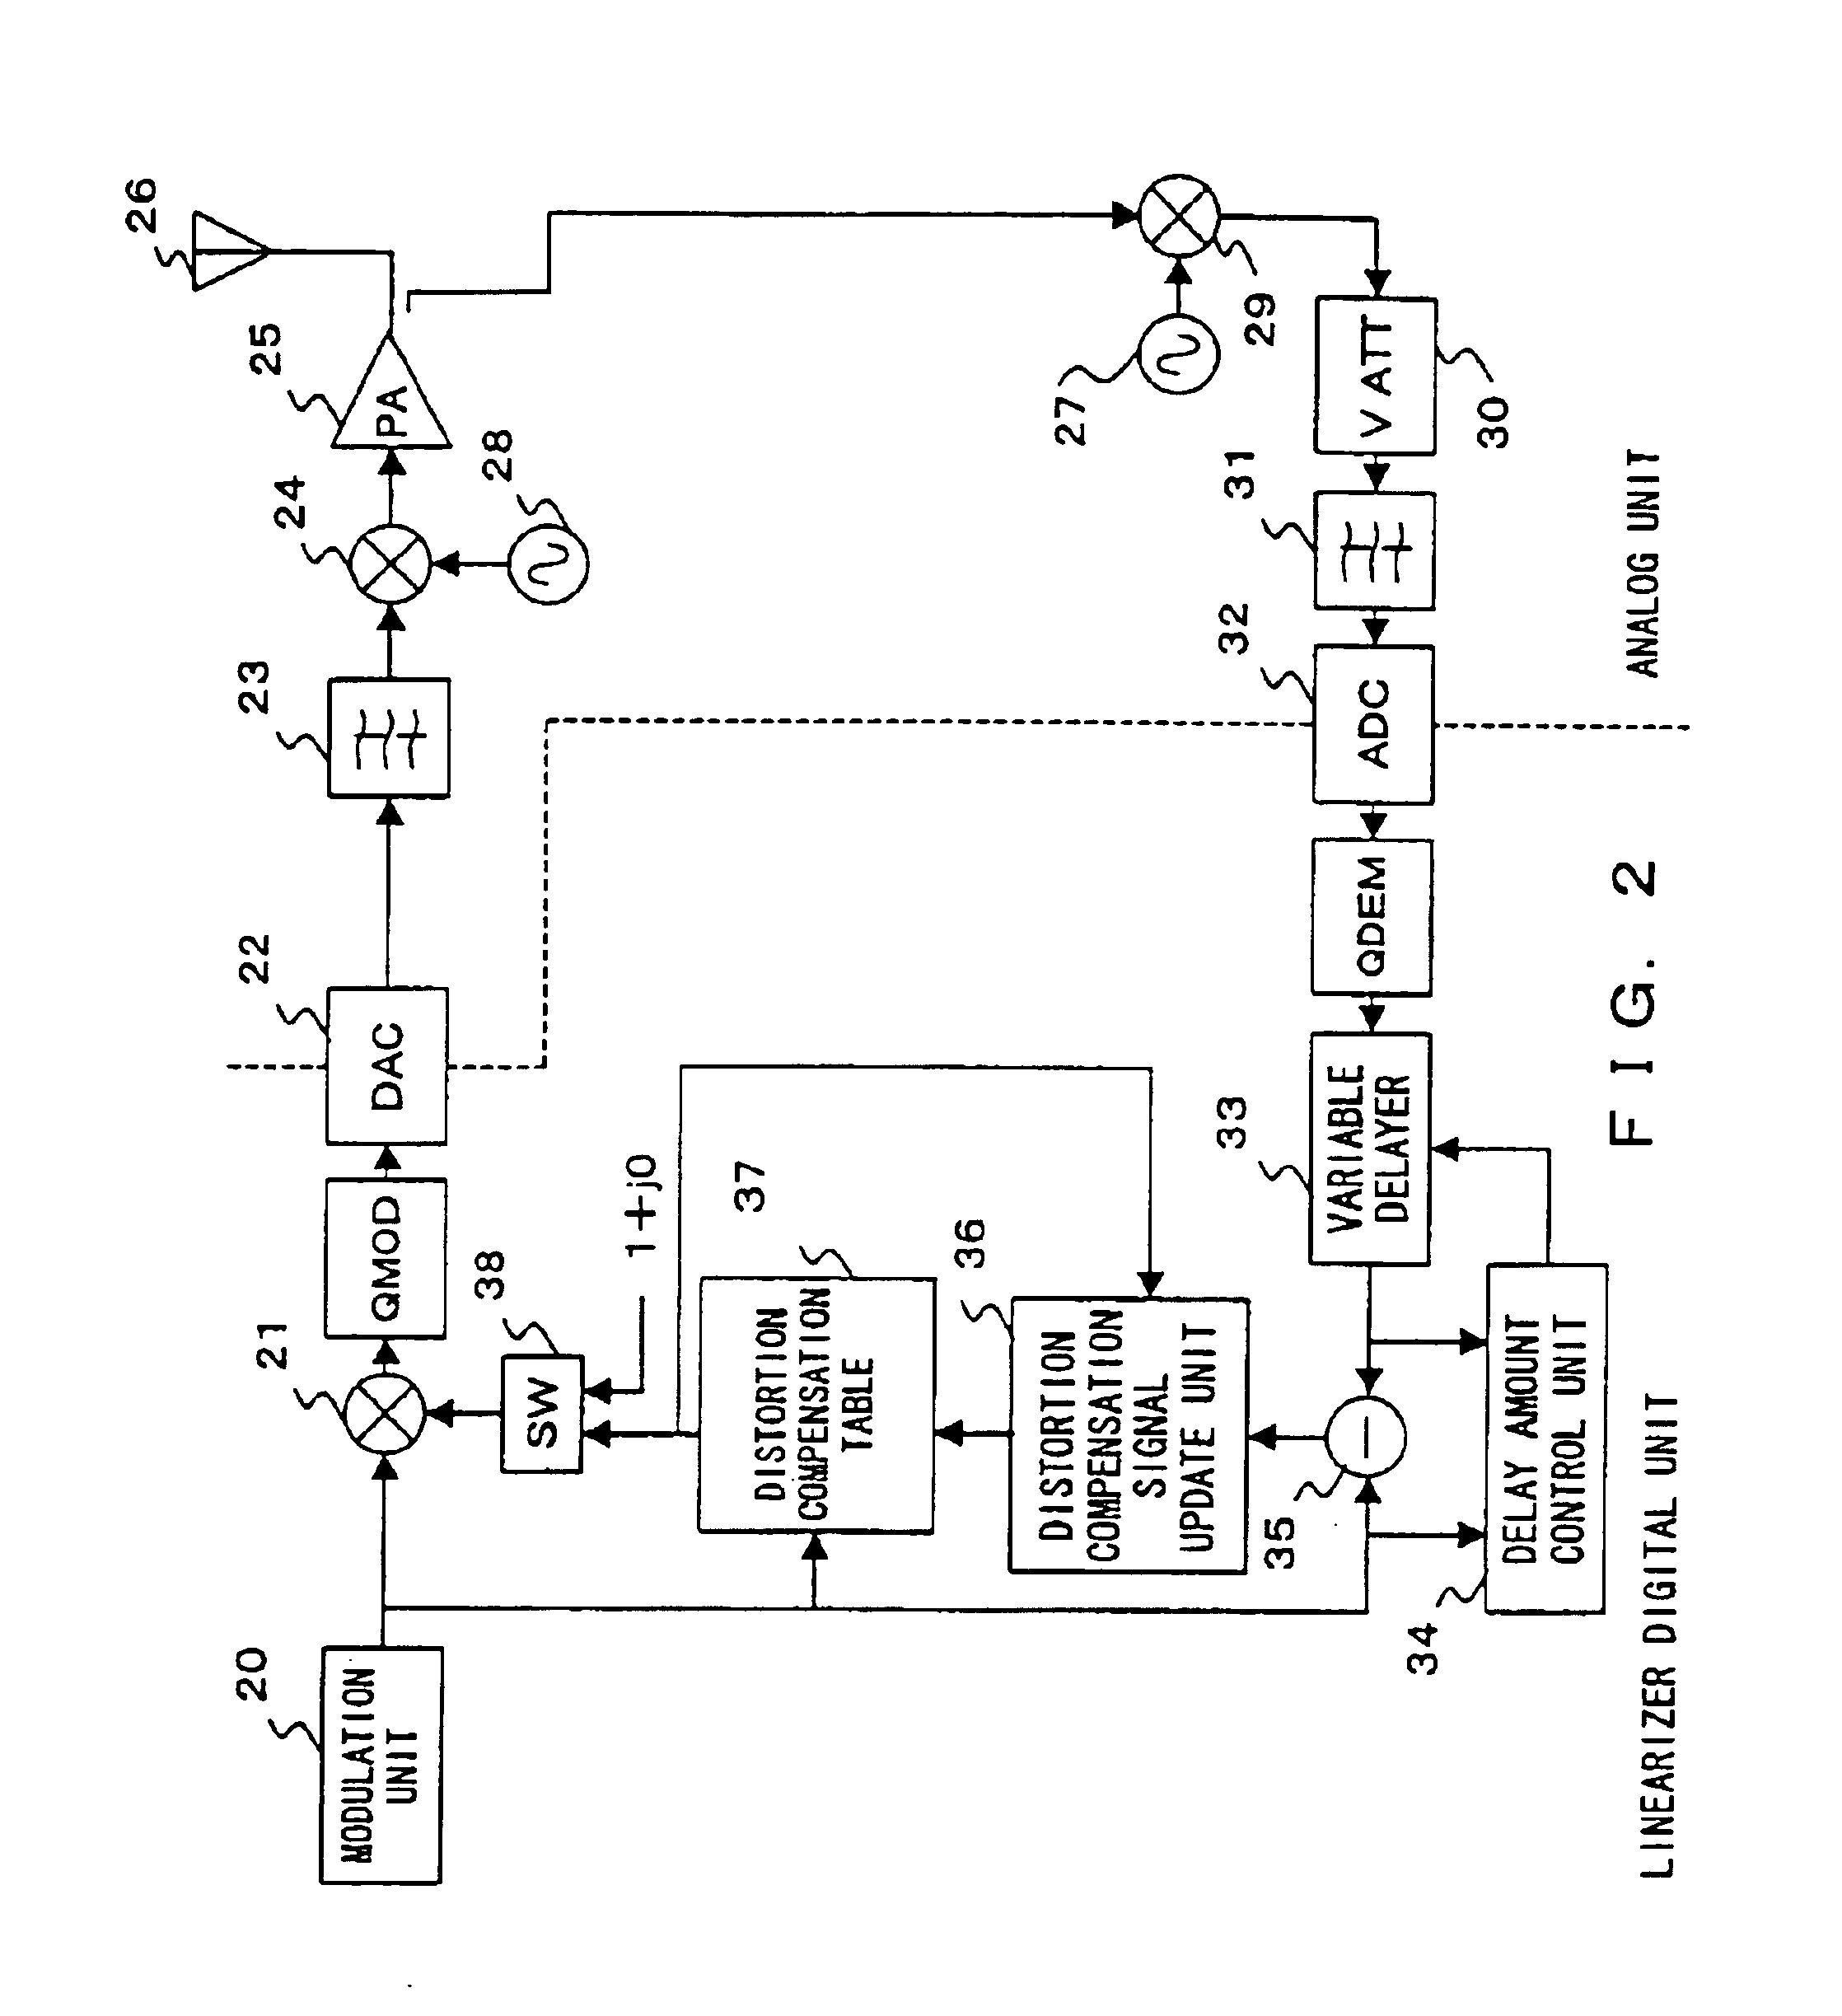 Activation method of communications apparatus with a non-linear distortion compensation device